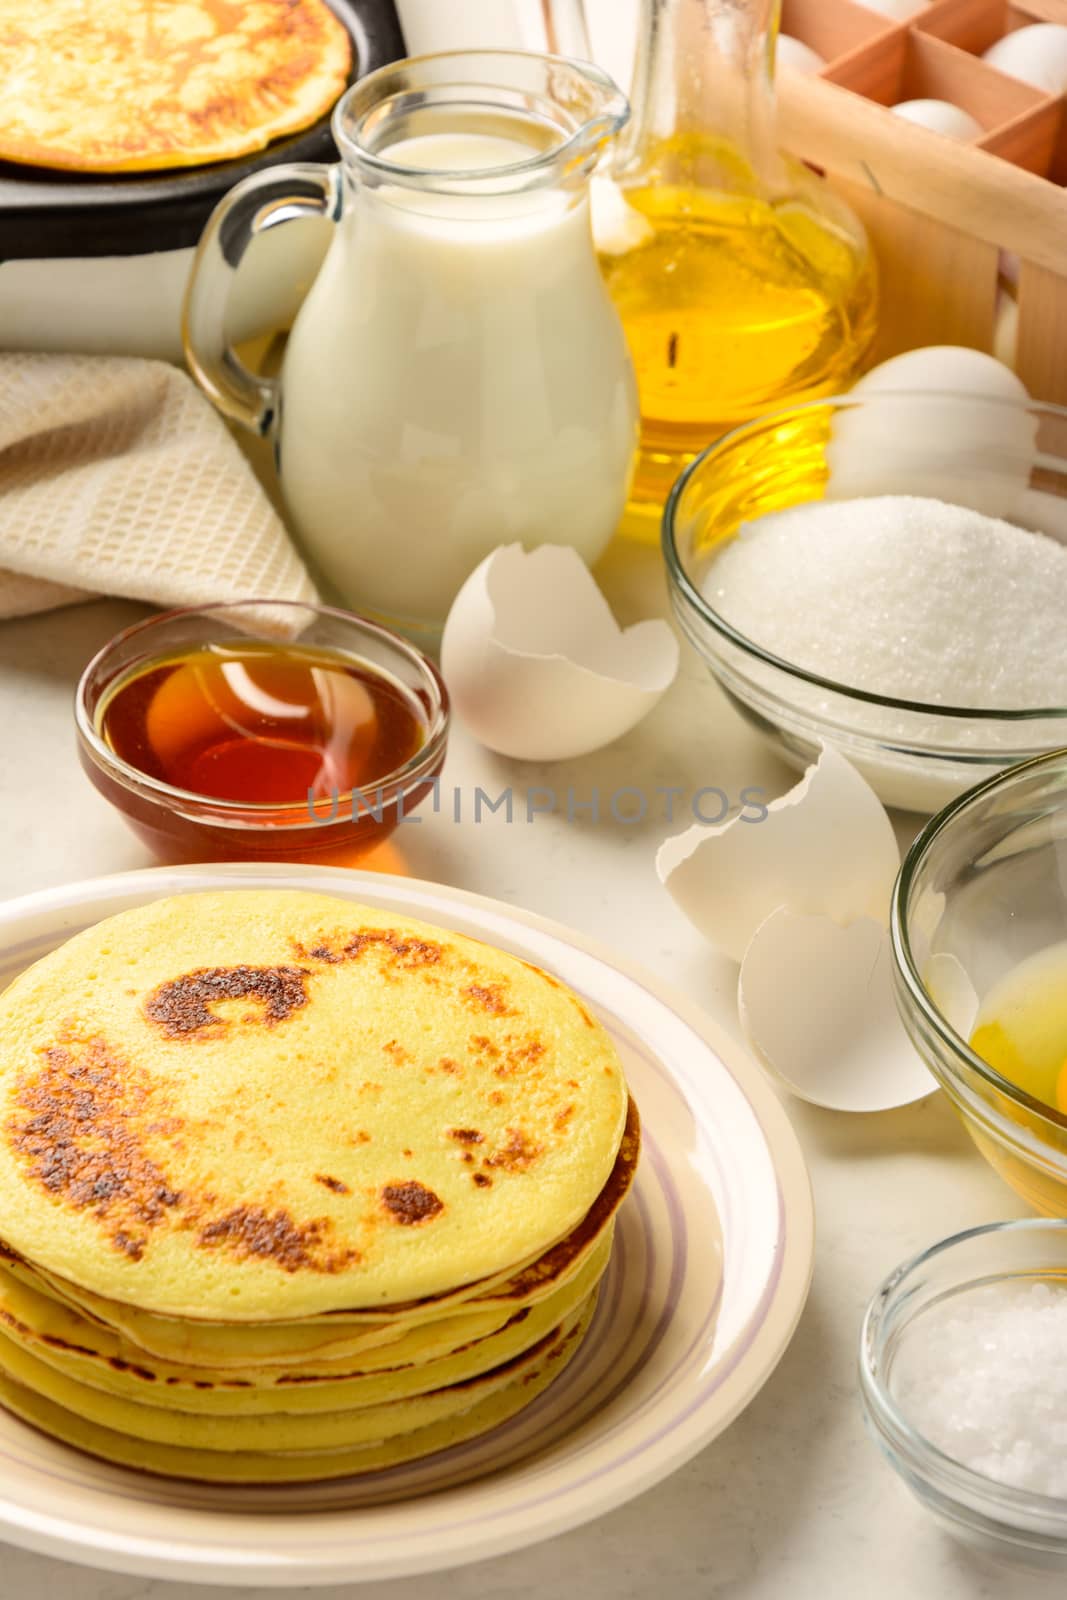 Pancakes and ingredients for making pancakes  by markova64el